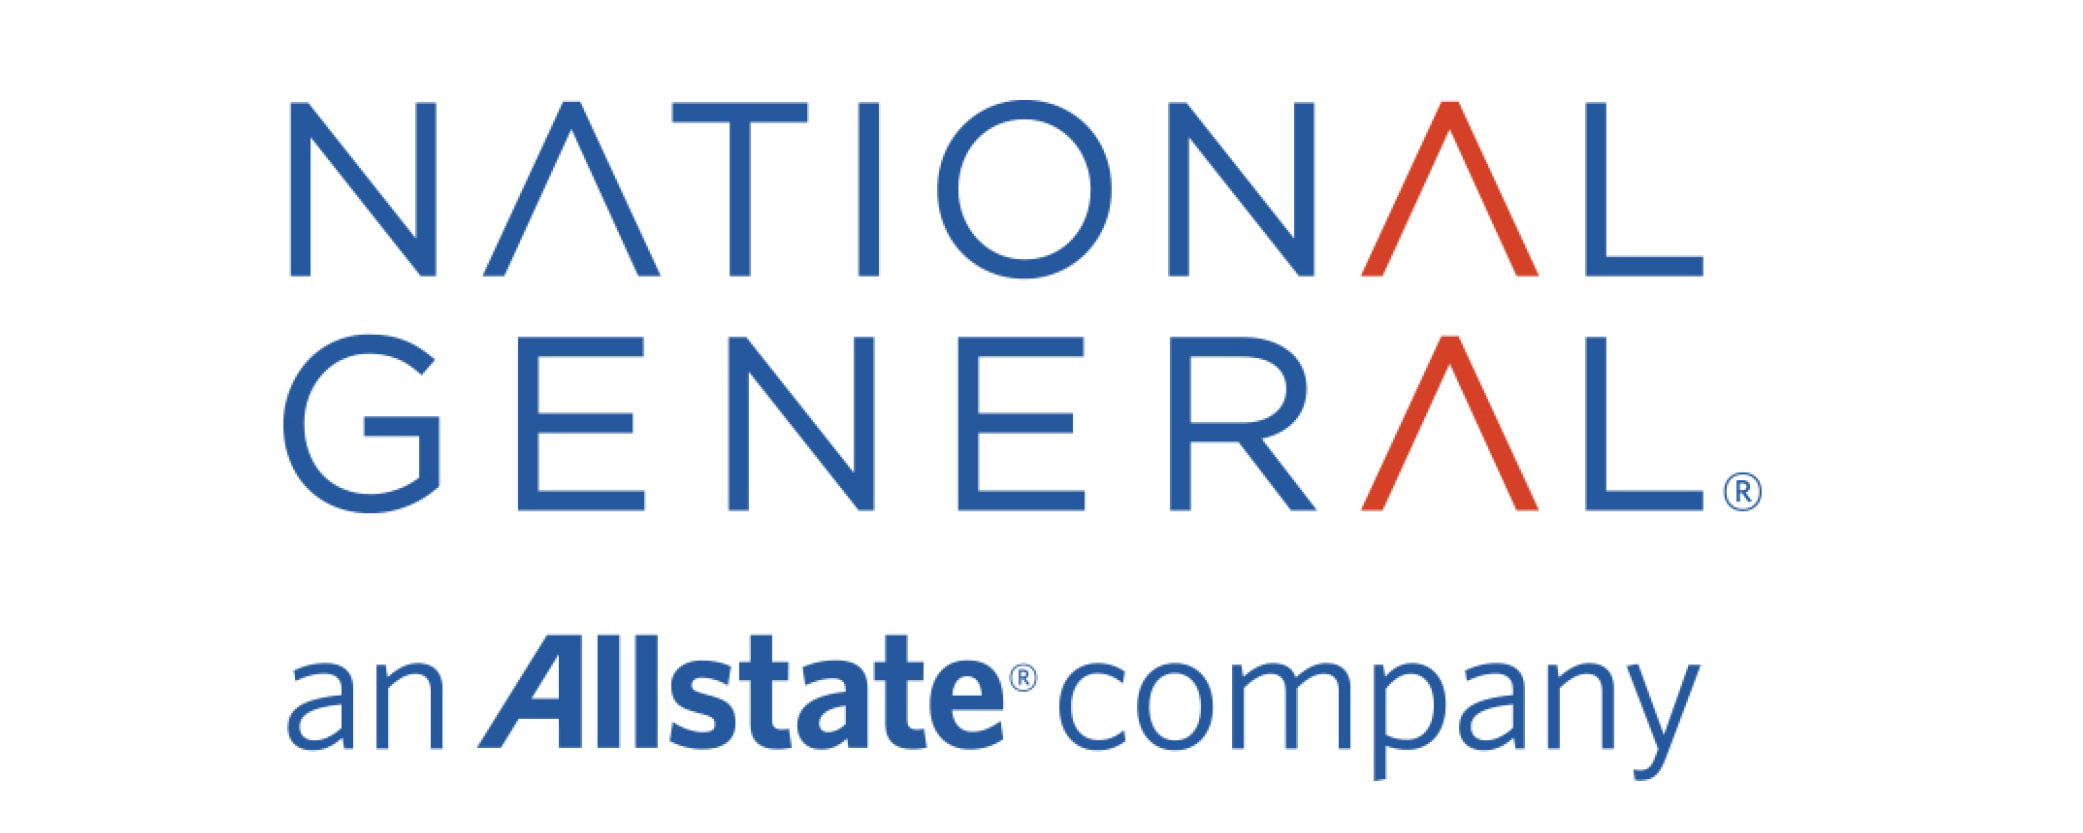 National General - an Allstate company